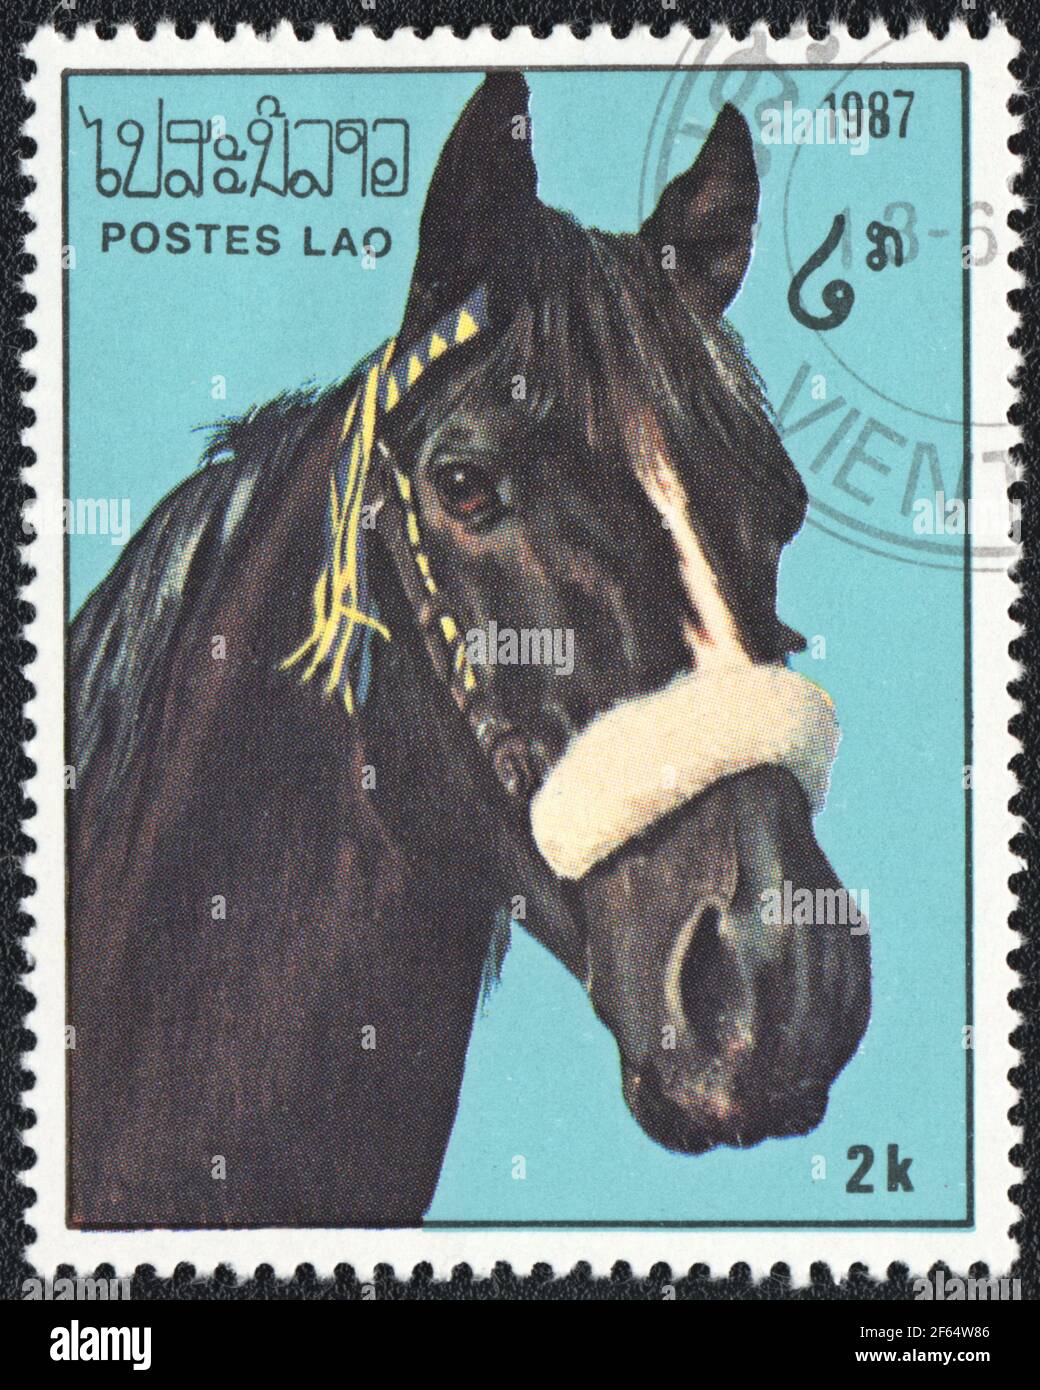 A postage stamp shows a black with white horse (Equus ferus caballus) from series: Thoroughbred Horses, Laos, 1987 Stock Photo